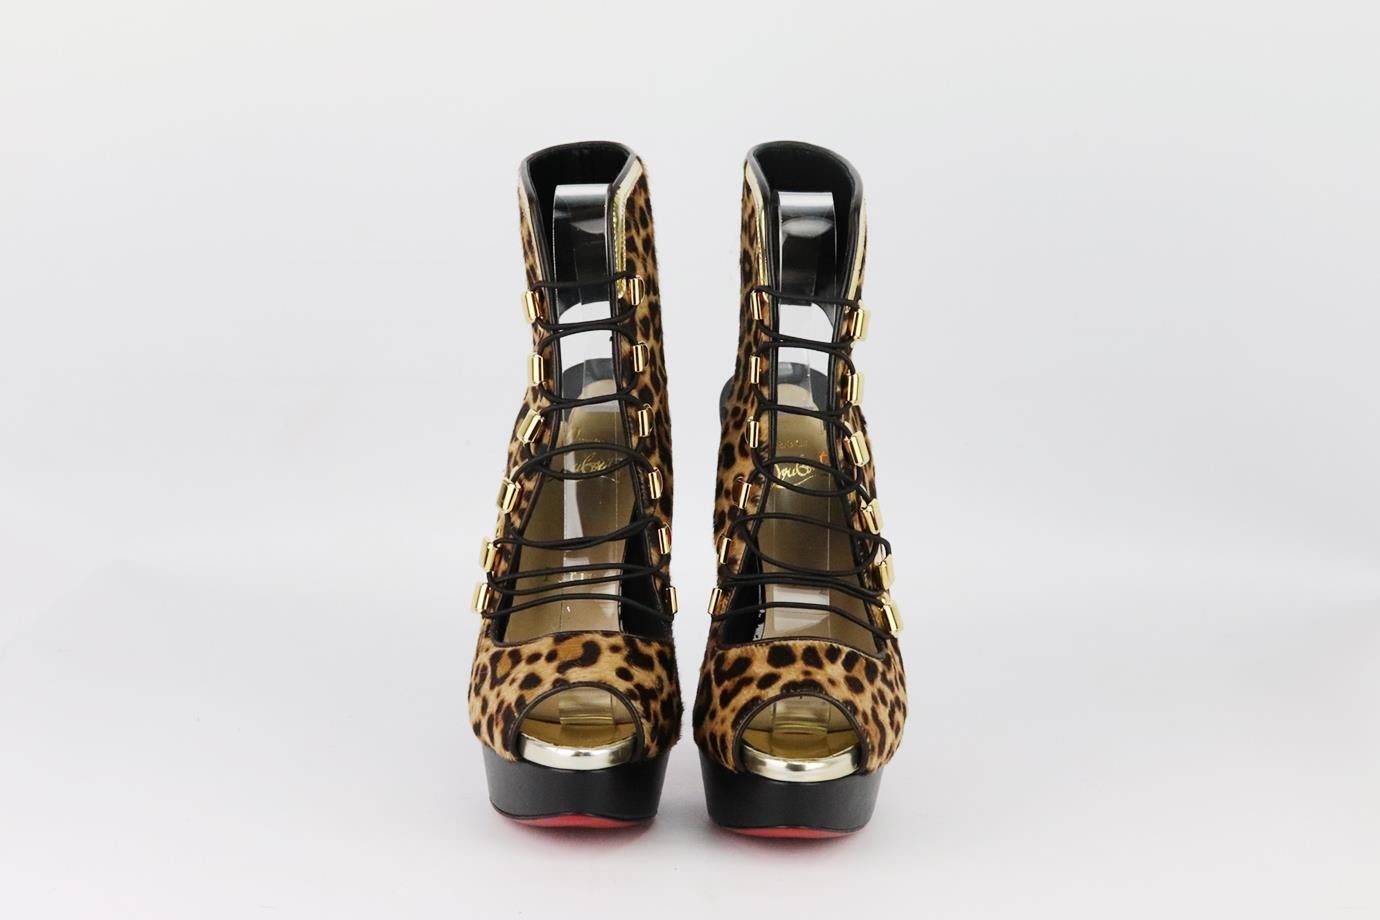 Christian Louboutin leopard print calf hair platform sandals. Made from leopard-print calf-hair with gold-tone lace up fastening and striking heel with the brand’s iconic red sole. Beige, tan and black. Lace up fastening at front. Does not come with